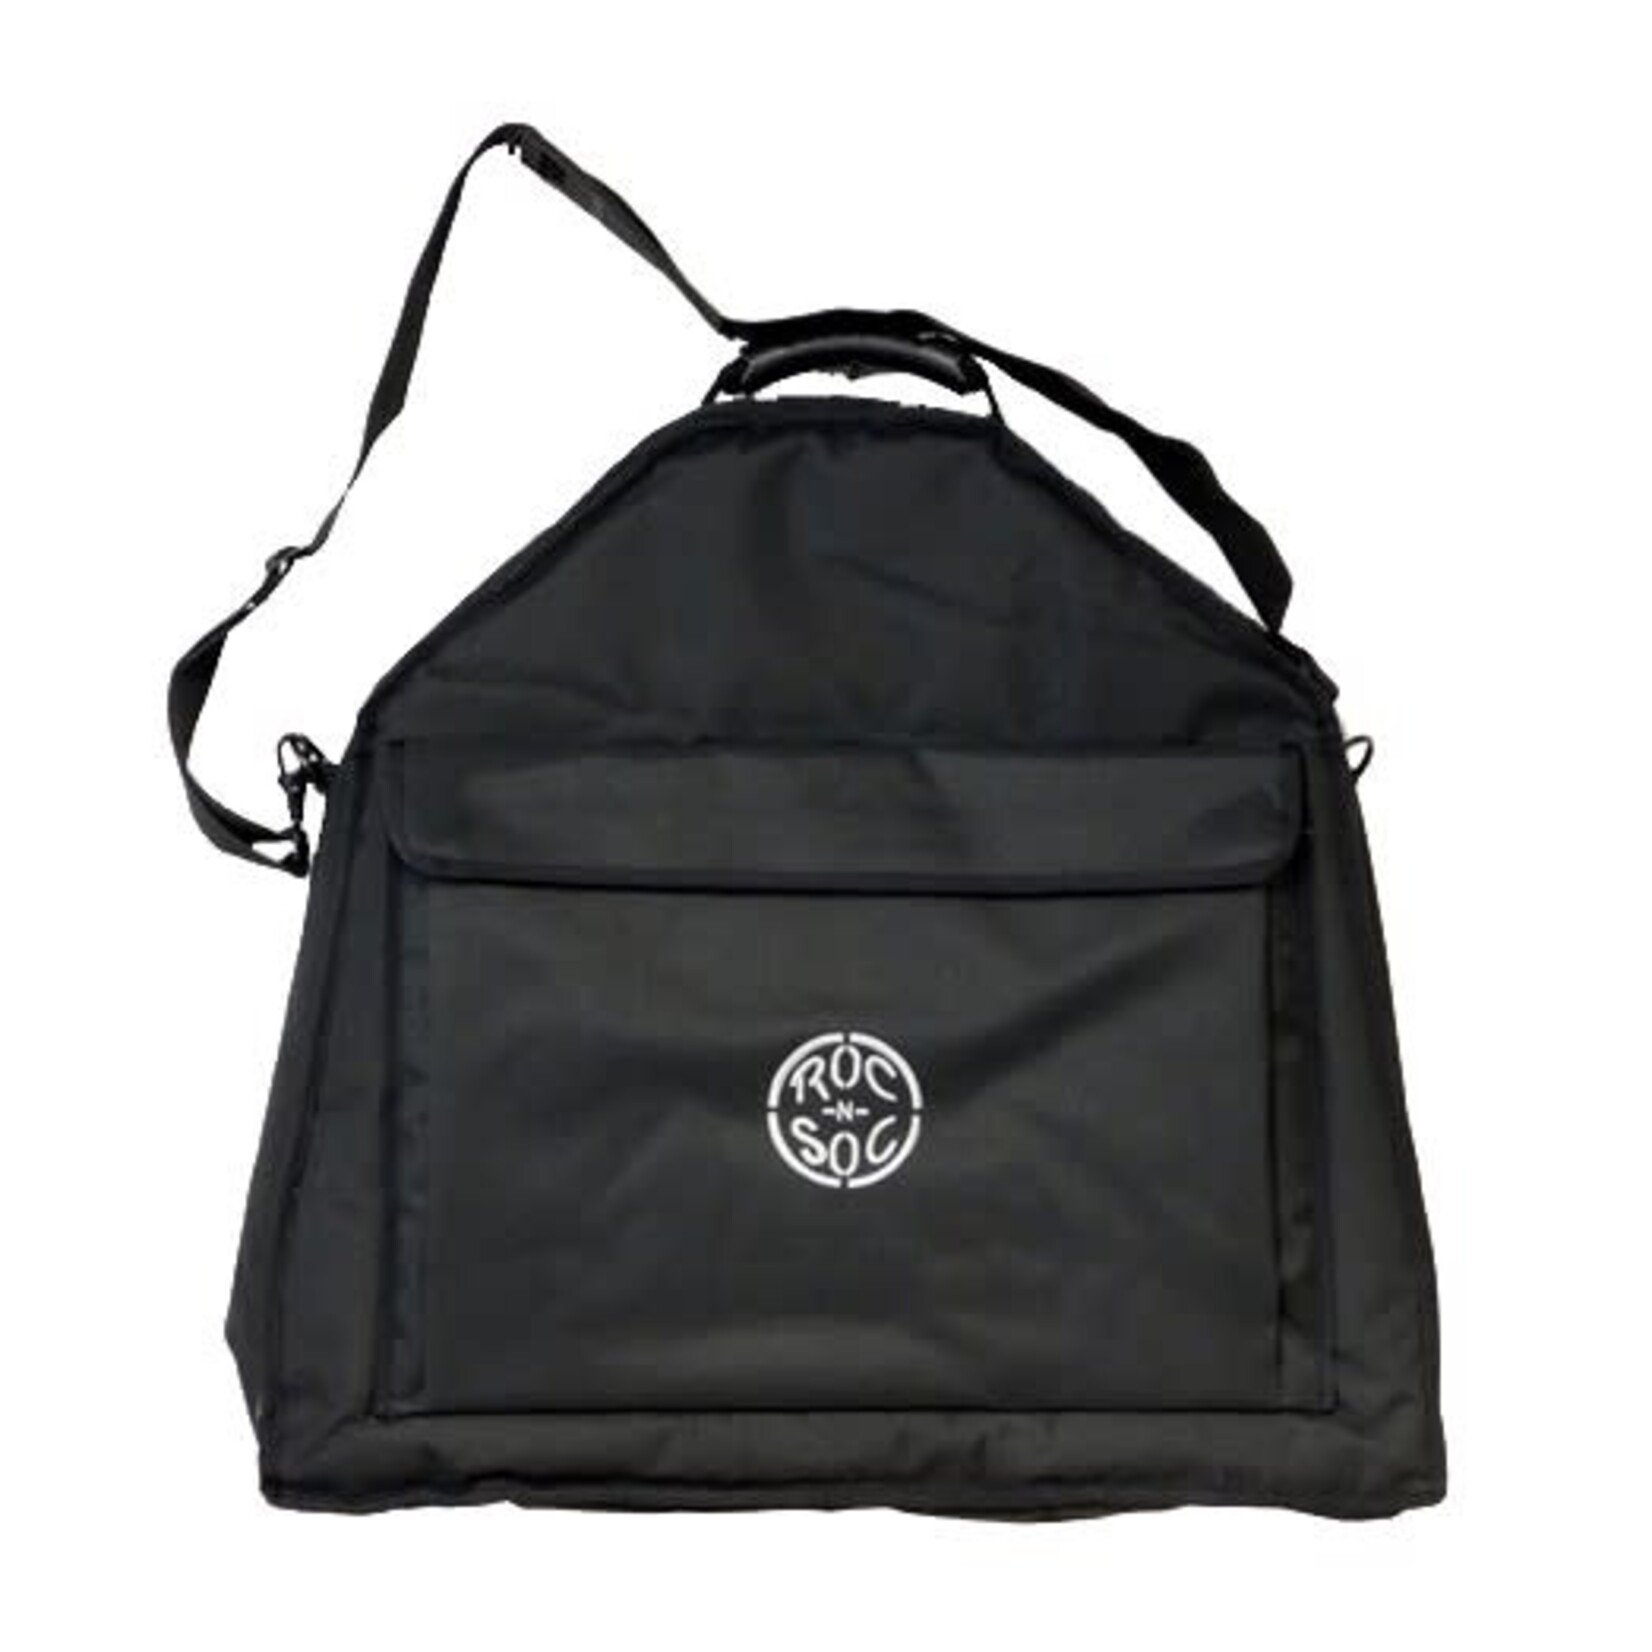 Roc-N-Soc Roc-N-Soc Throne Carry Bag (for Nitro and Manual  Extended-Height Models)